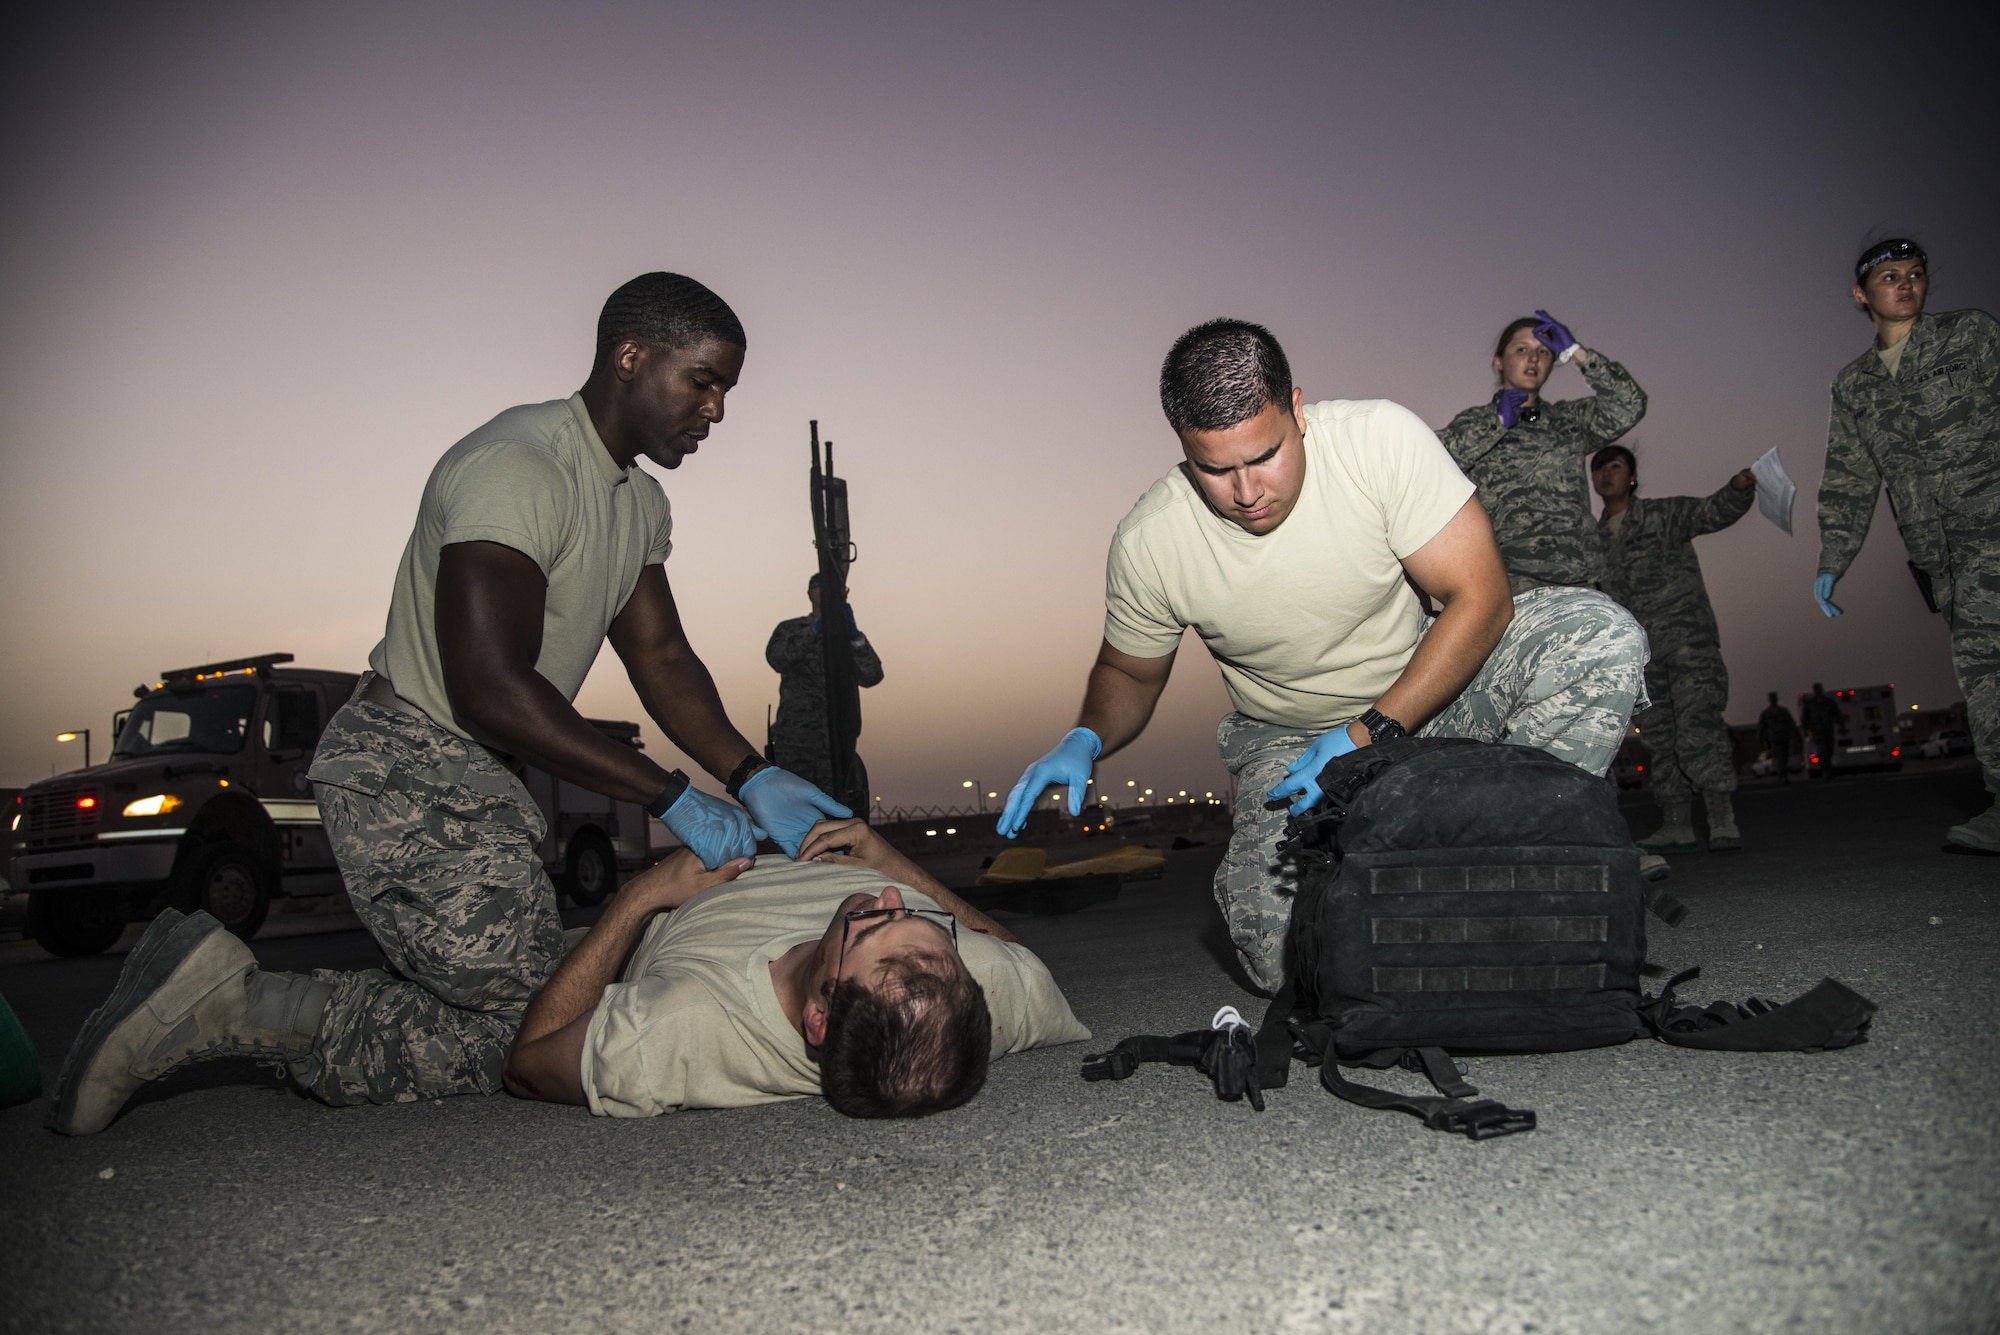 U.S. Air Force Staff Sgts. Robert McClintok and Jose Leiva simulate performing life-saving procedures on a patient June 19, 2015, during an active shooter scenario at Al Udeid Air Base, Qatar. Both Airmen are emergency medical technicians assigned to the 379th Expeditionary Medical Operations Squadron. The active shooter scenario took place testing several agencies on base to evaluate their reactions to the scenario to make sure proper protocols were followed in case an on-base incident truly ever occurred.   (U.S. Air Force photo by Tech. Sgt. Rasheen Douglas)